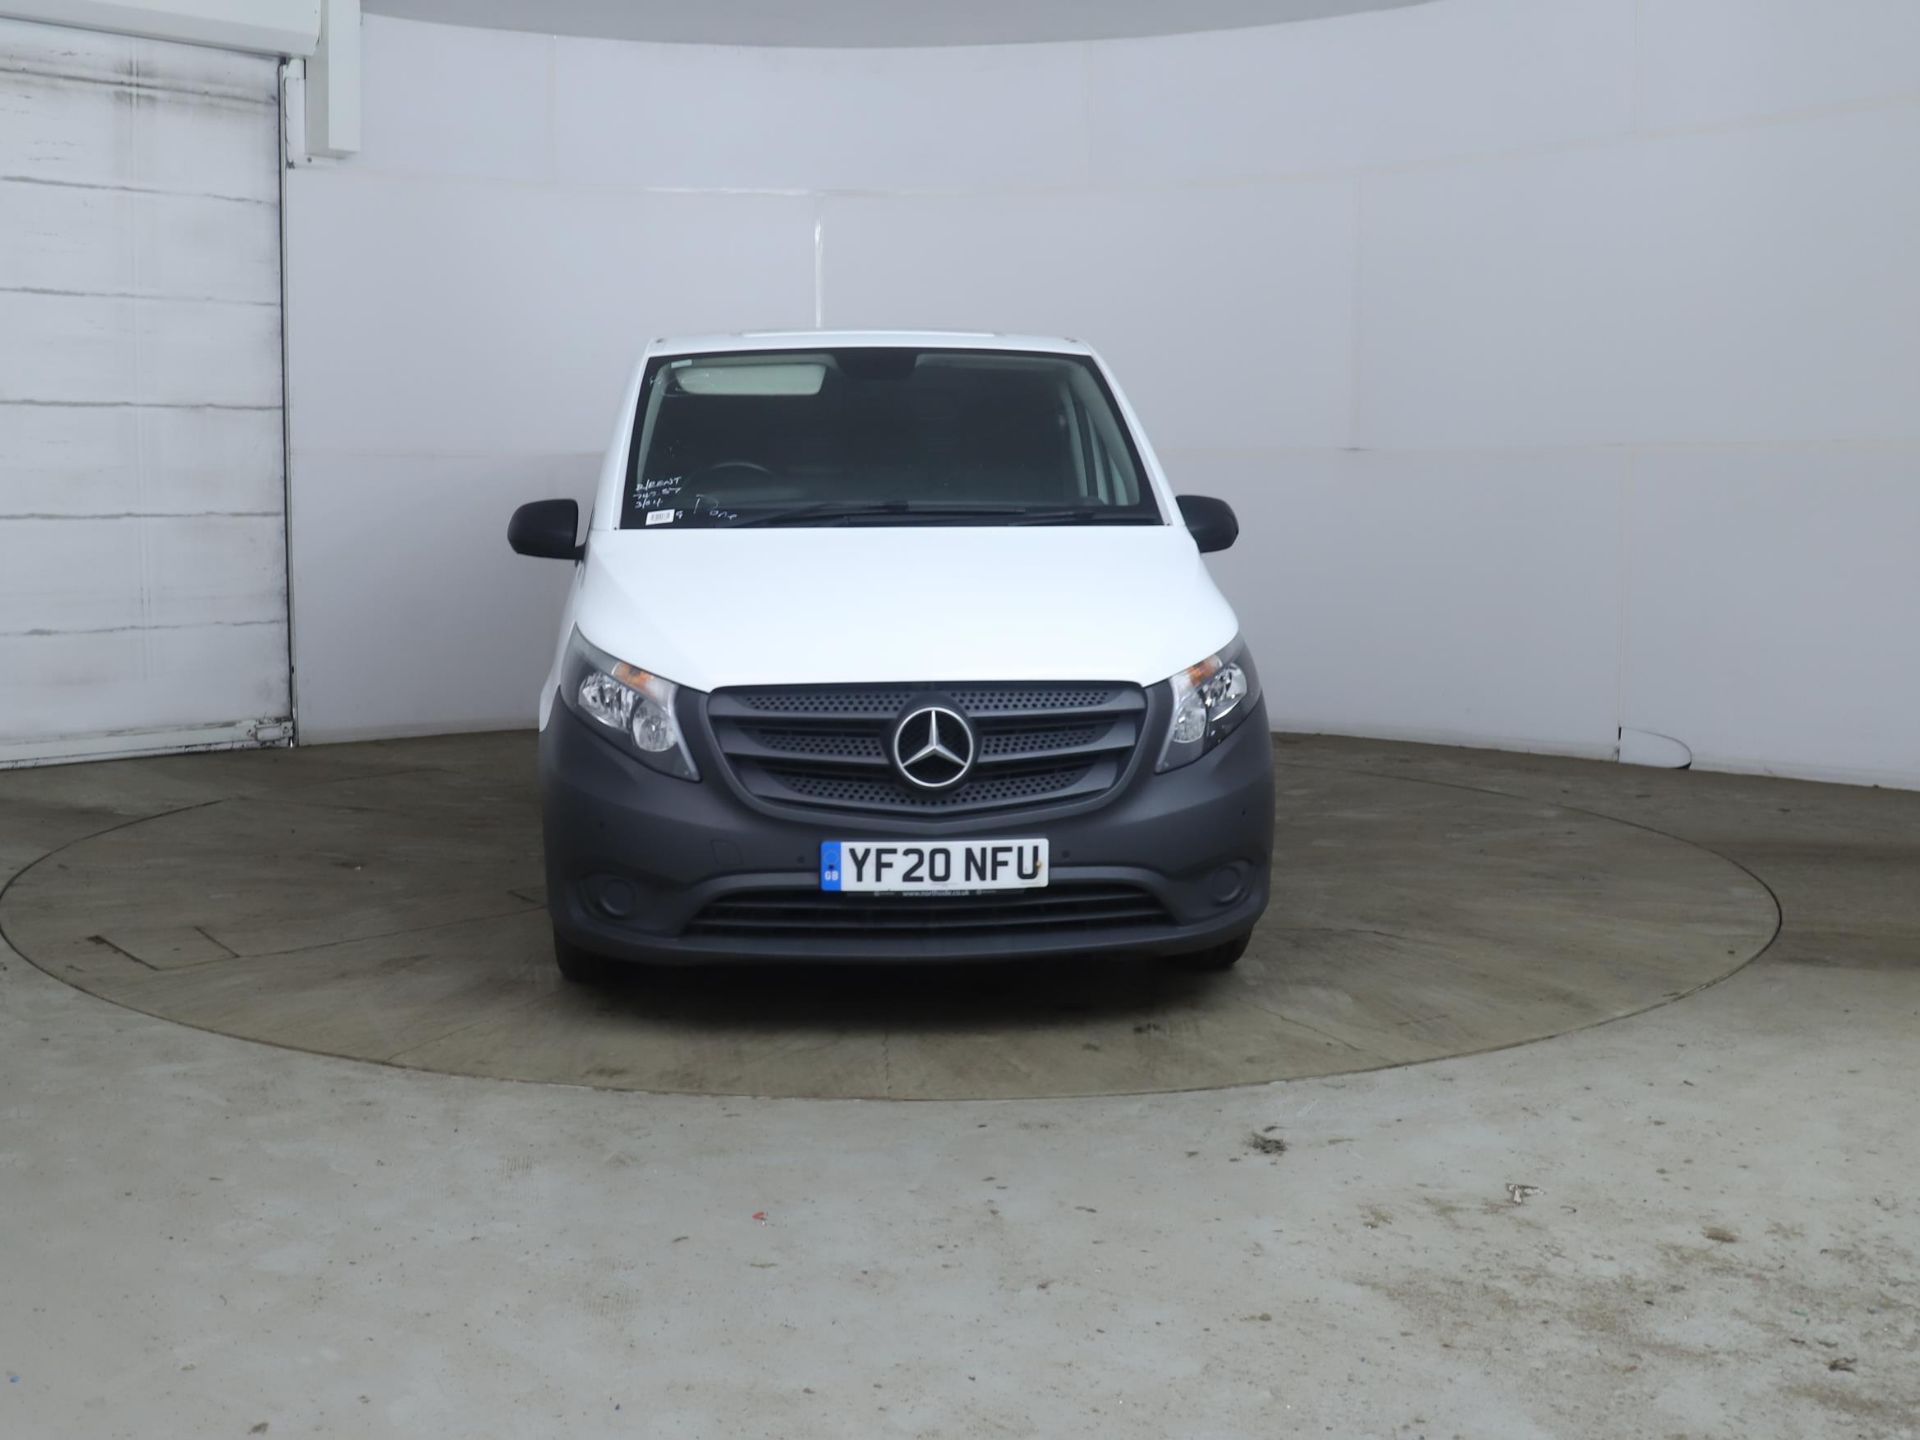 MERCEDES BENZ VITO CDI PURE - 2020 20 Reg - Only 74k Miles - 1 Owner From New - Parking Sensors - Bild 6 aus 12